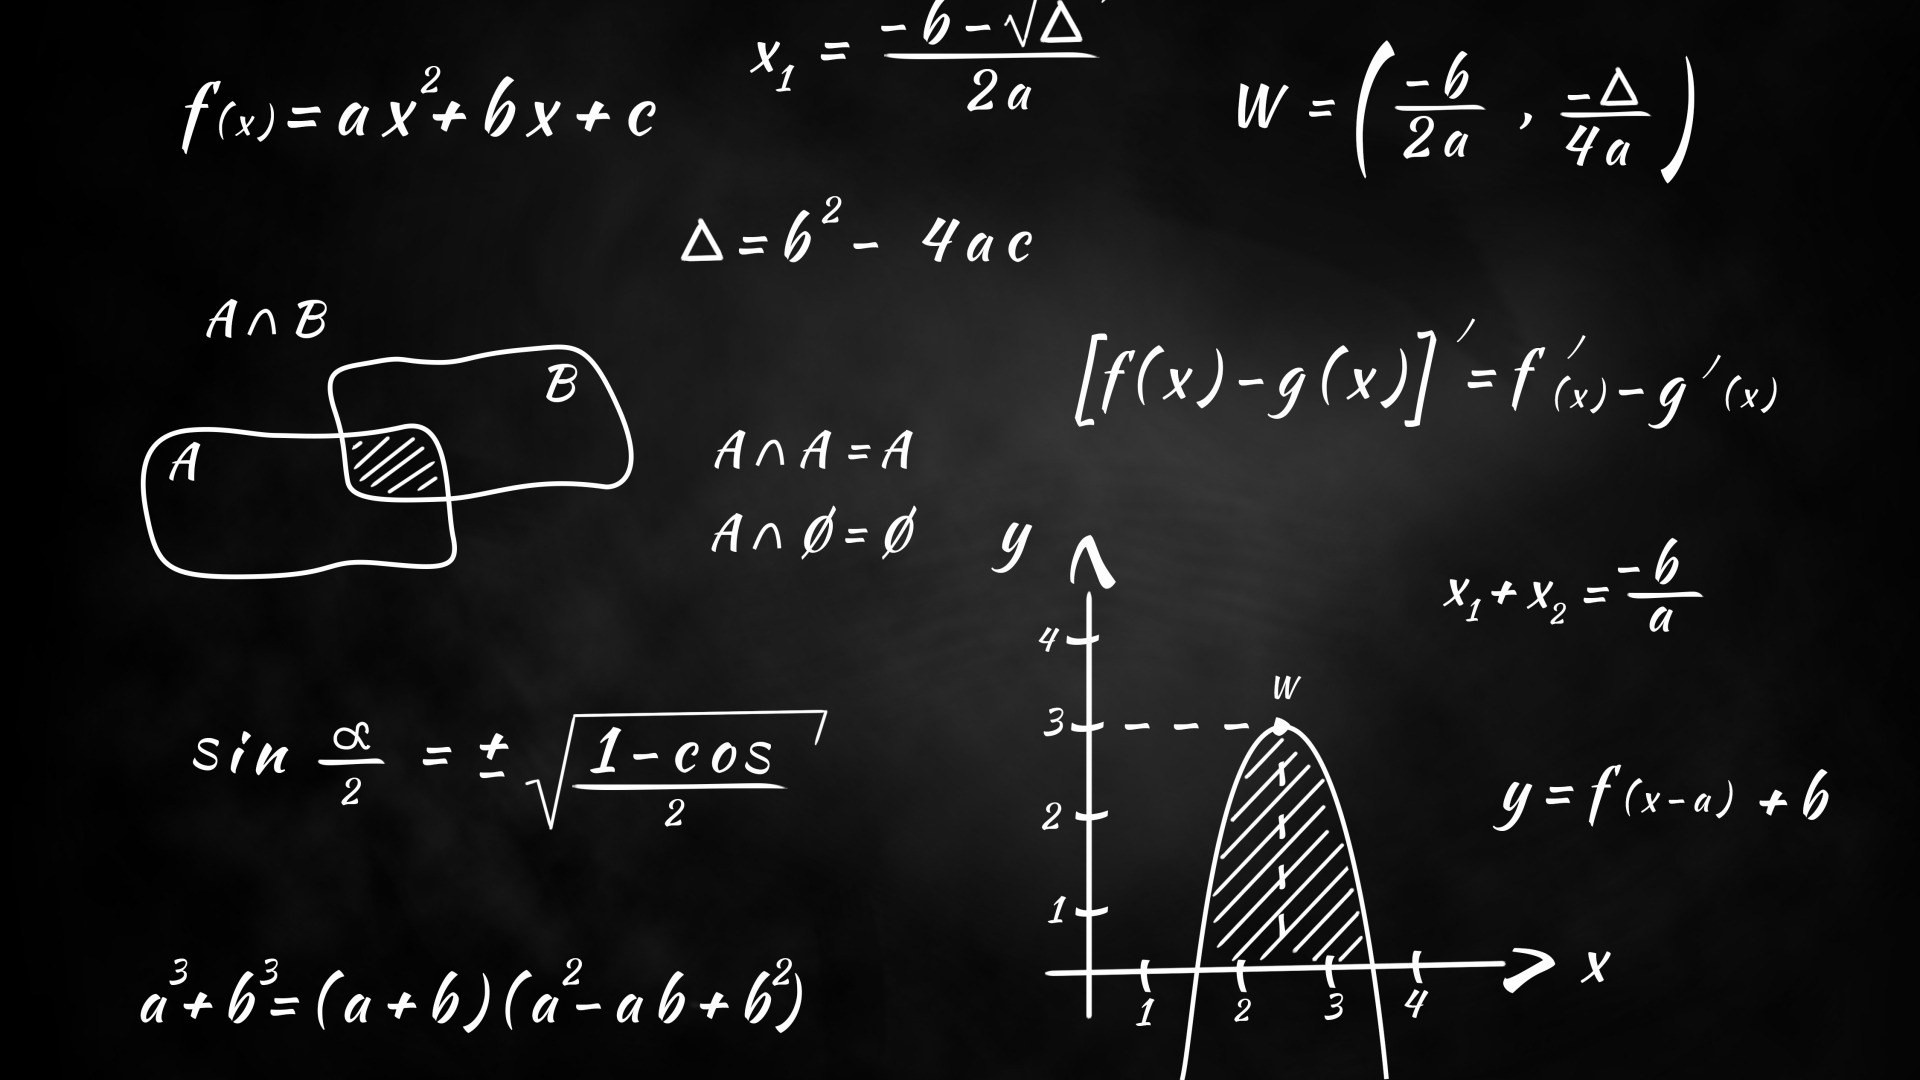 General 1920x1080 monochrome blackboard mathematics graph numbers science equation formula simple background